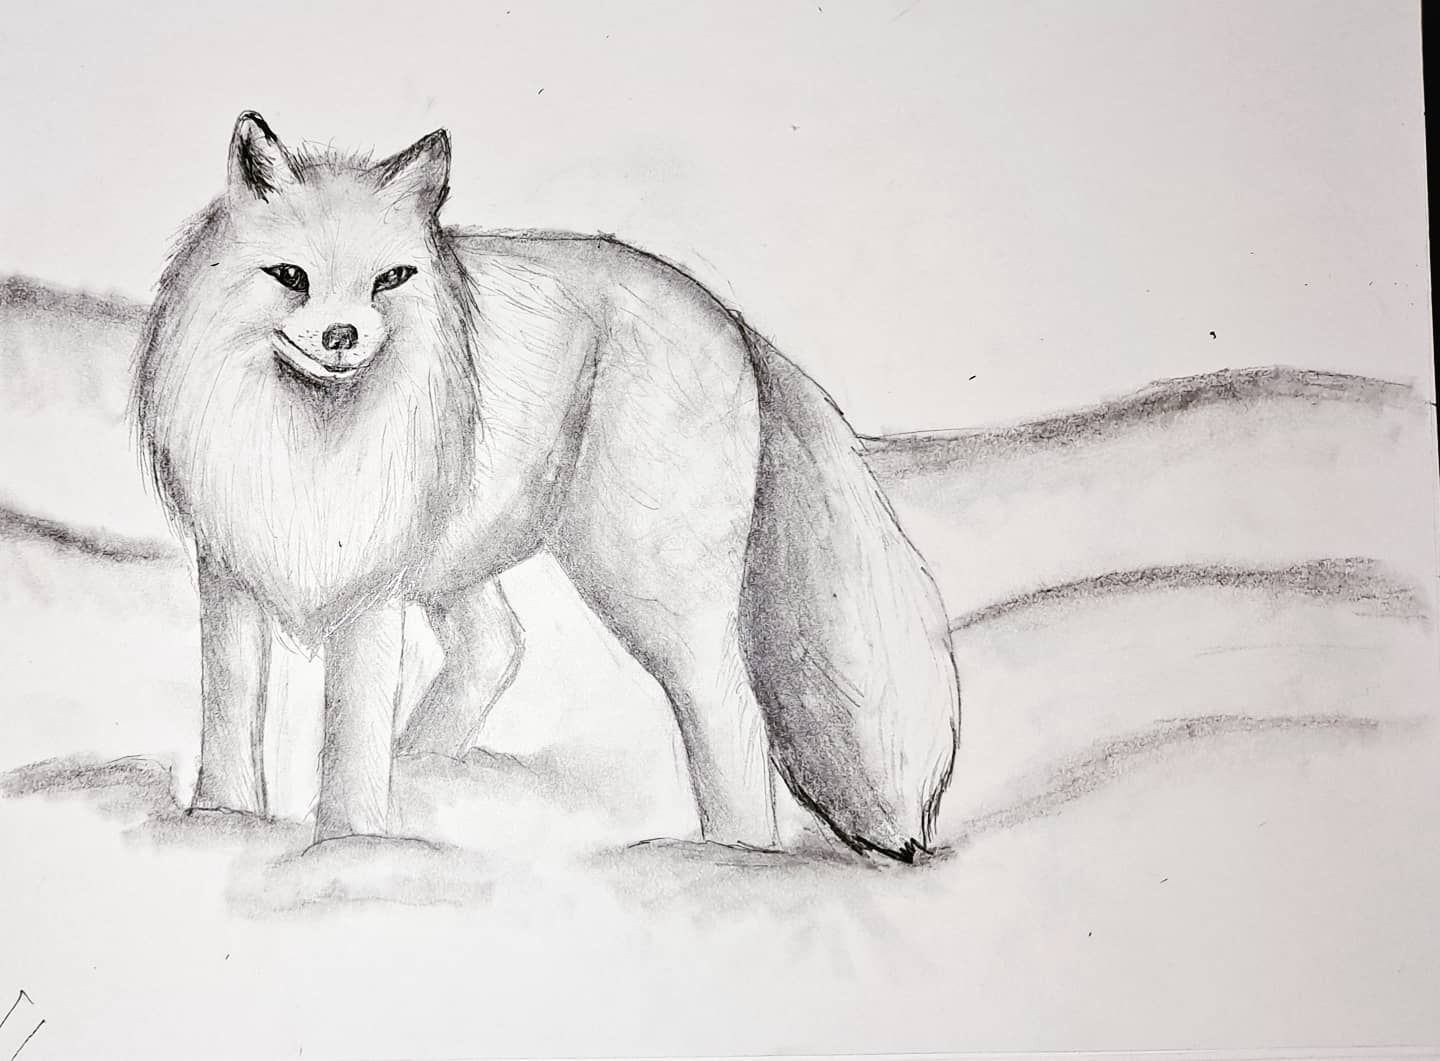 Winter Animal Art Realistic Arctic Fox Sketch Small Online Class for